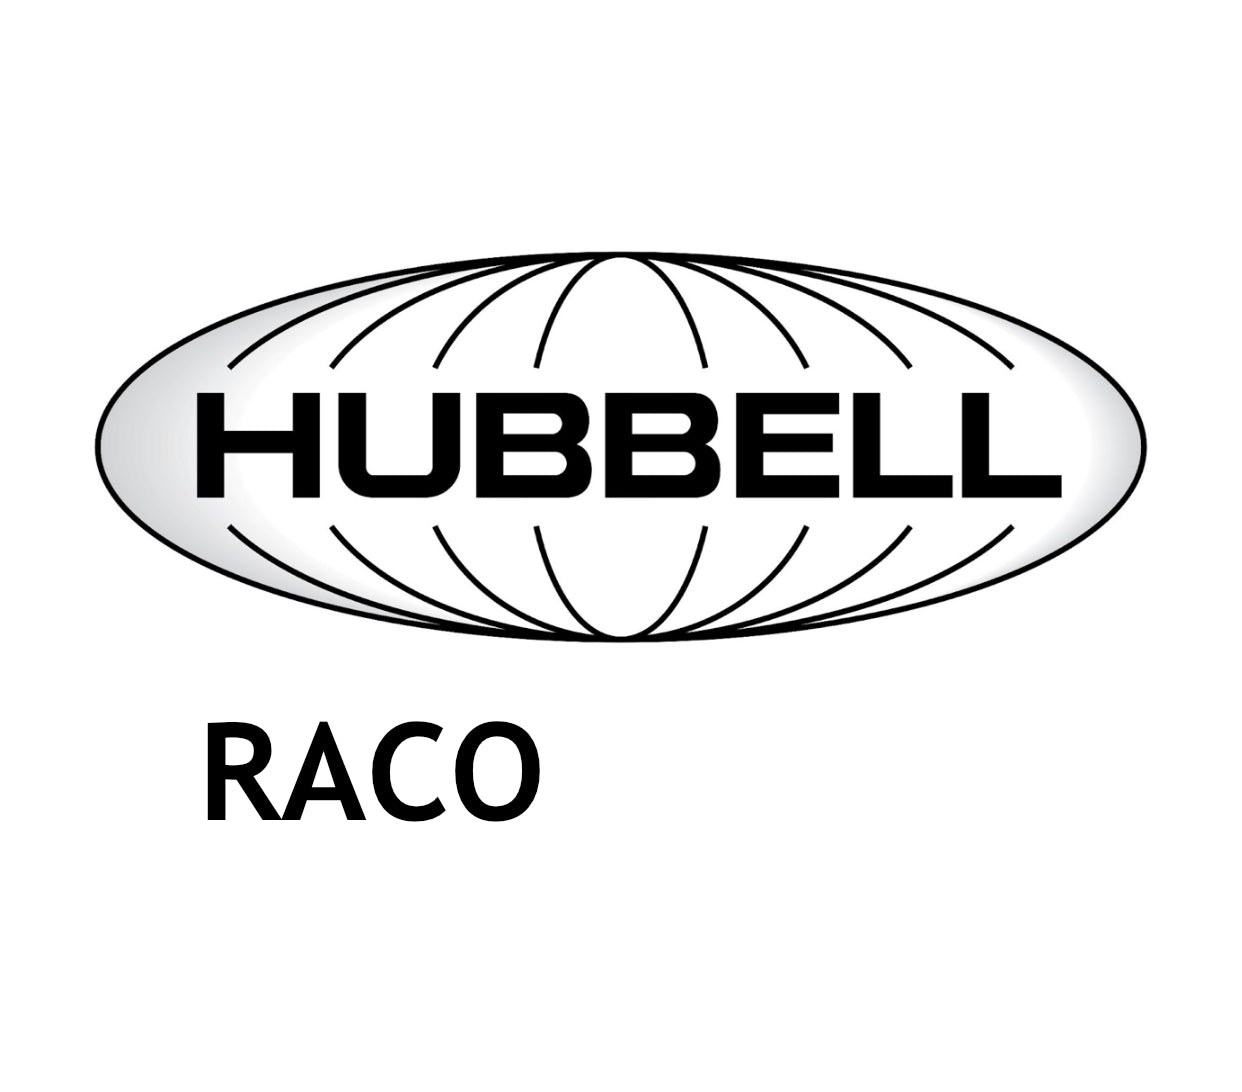 HUBBELL RACO